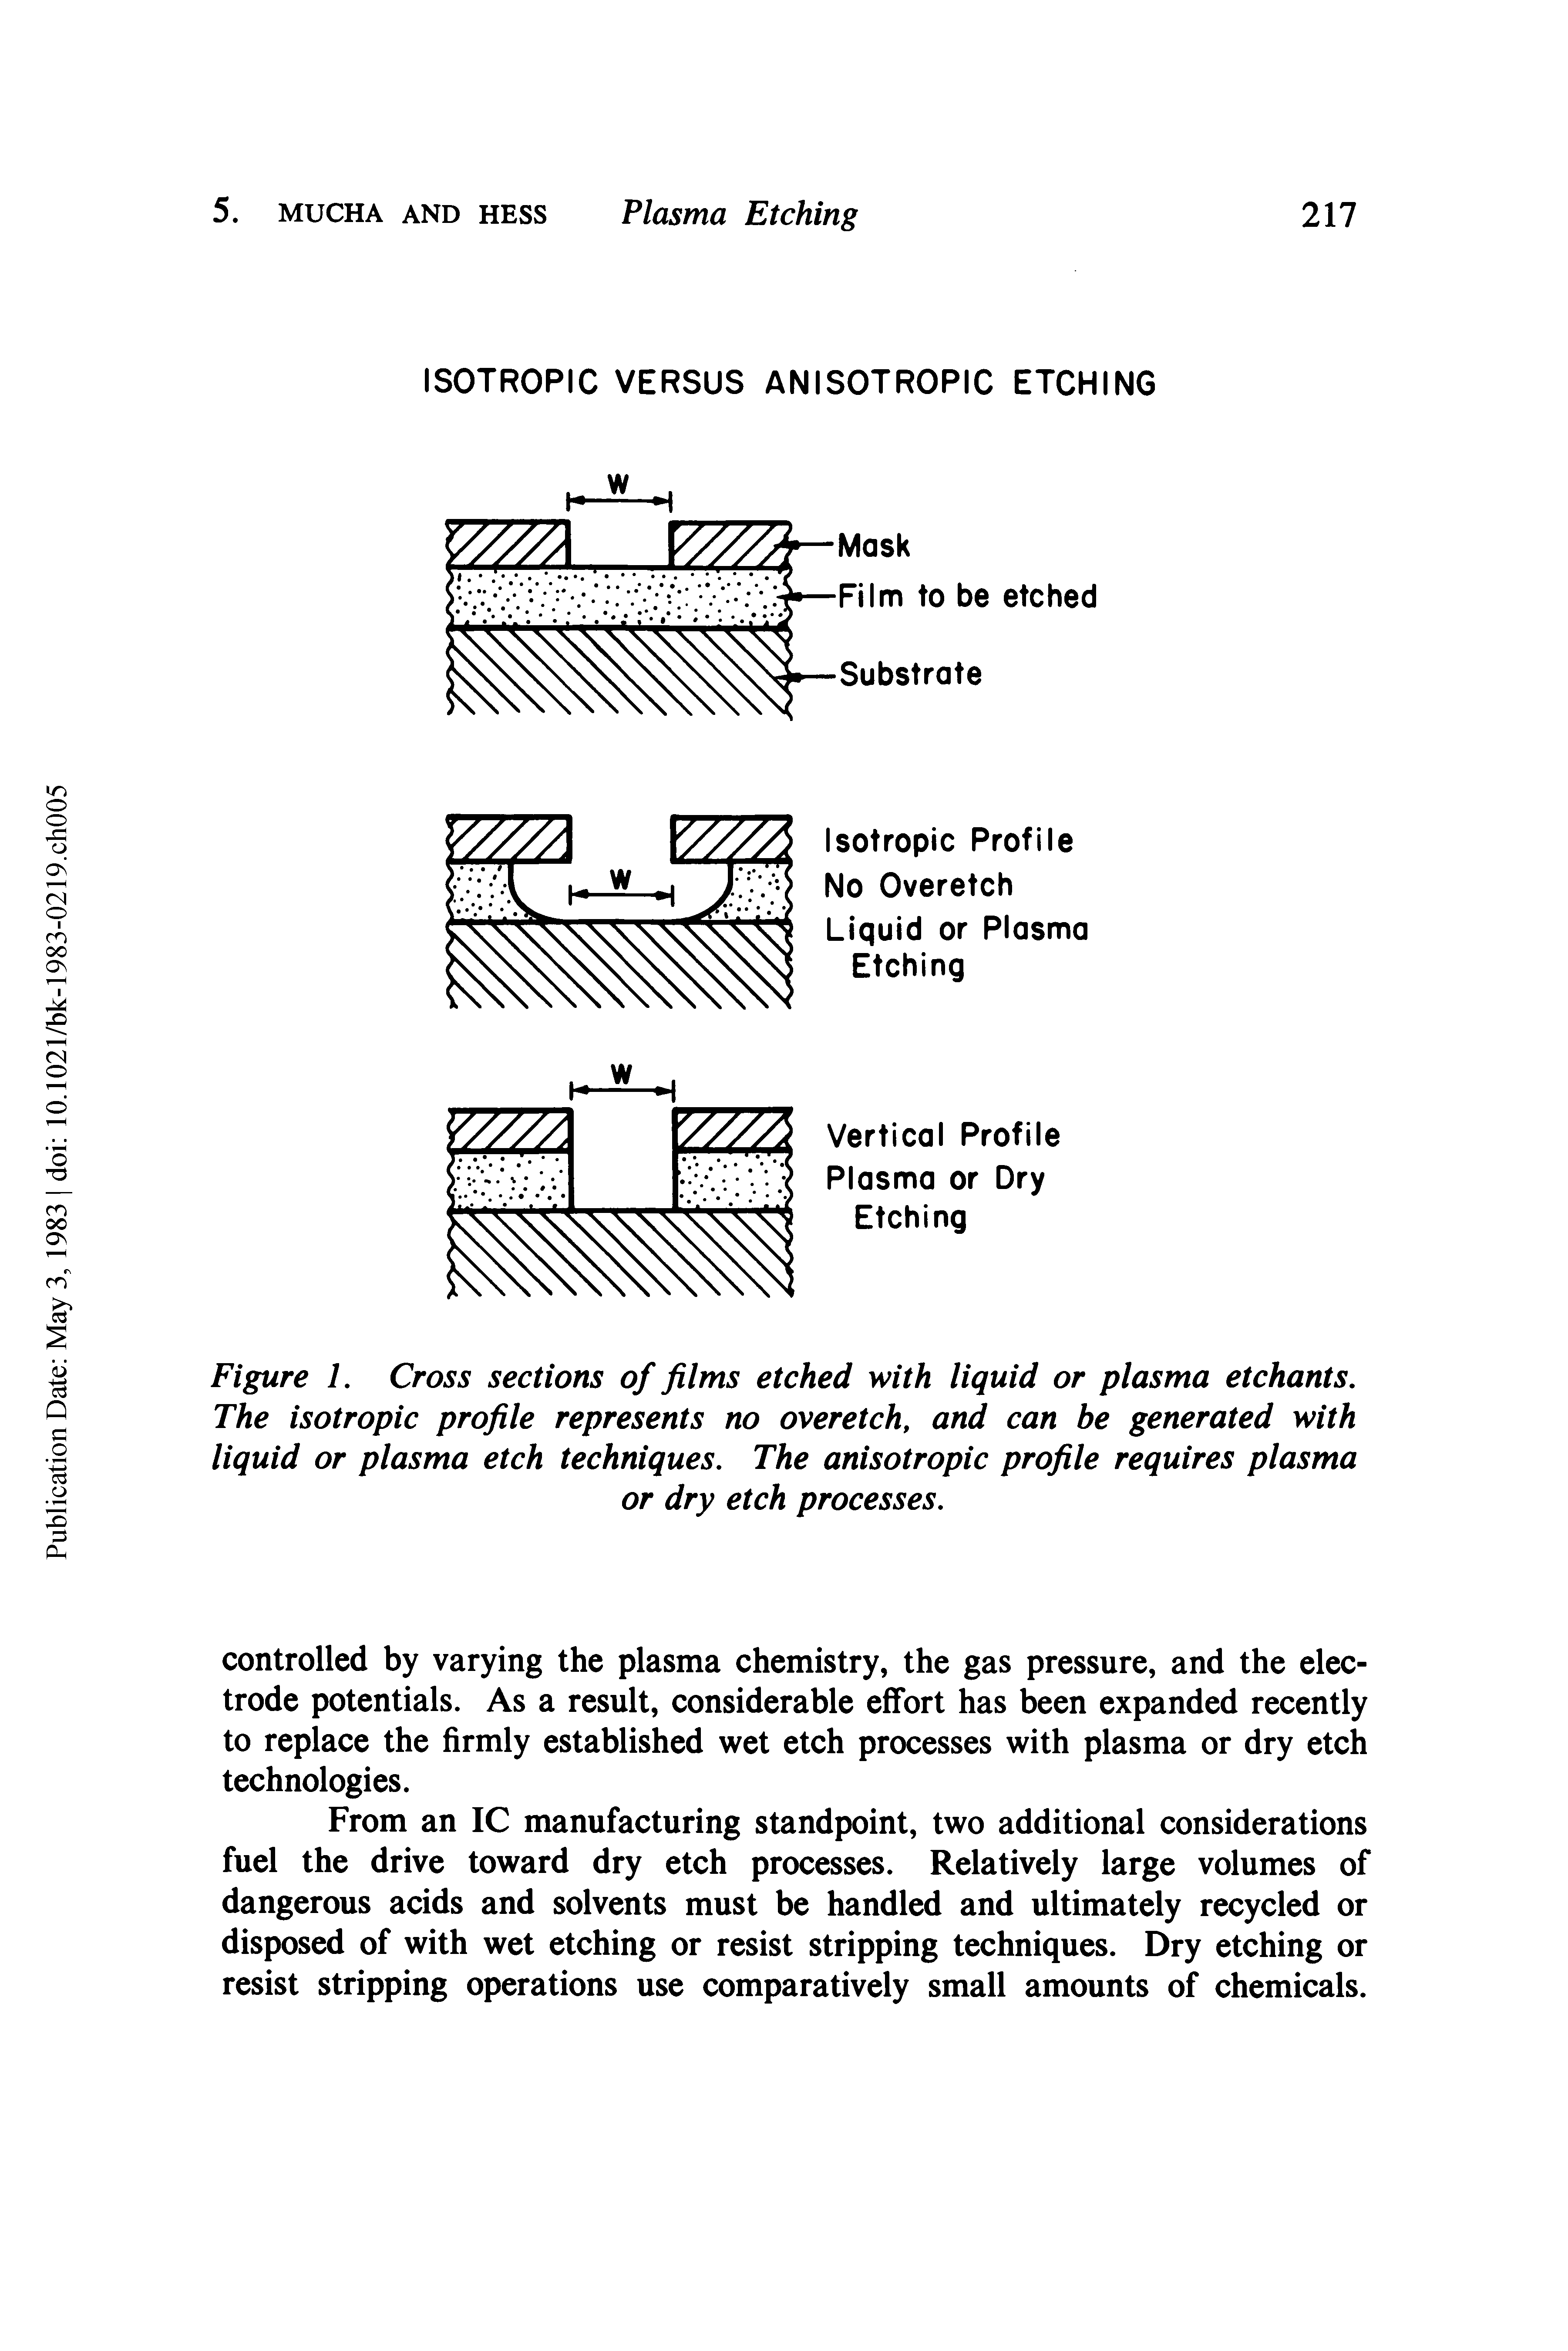 Figure 1. Cross sections of films etched with liquid or plasma etchants. The isotropic profile represents no overetch, and can be generated with liquid or plasma etch techniques. The anisotropic profile requires plasma...